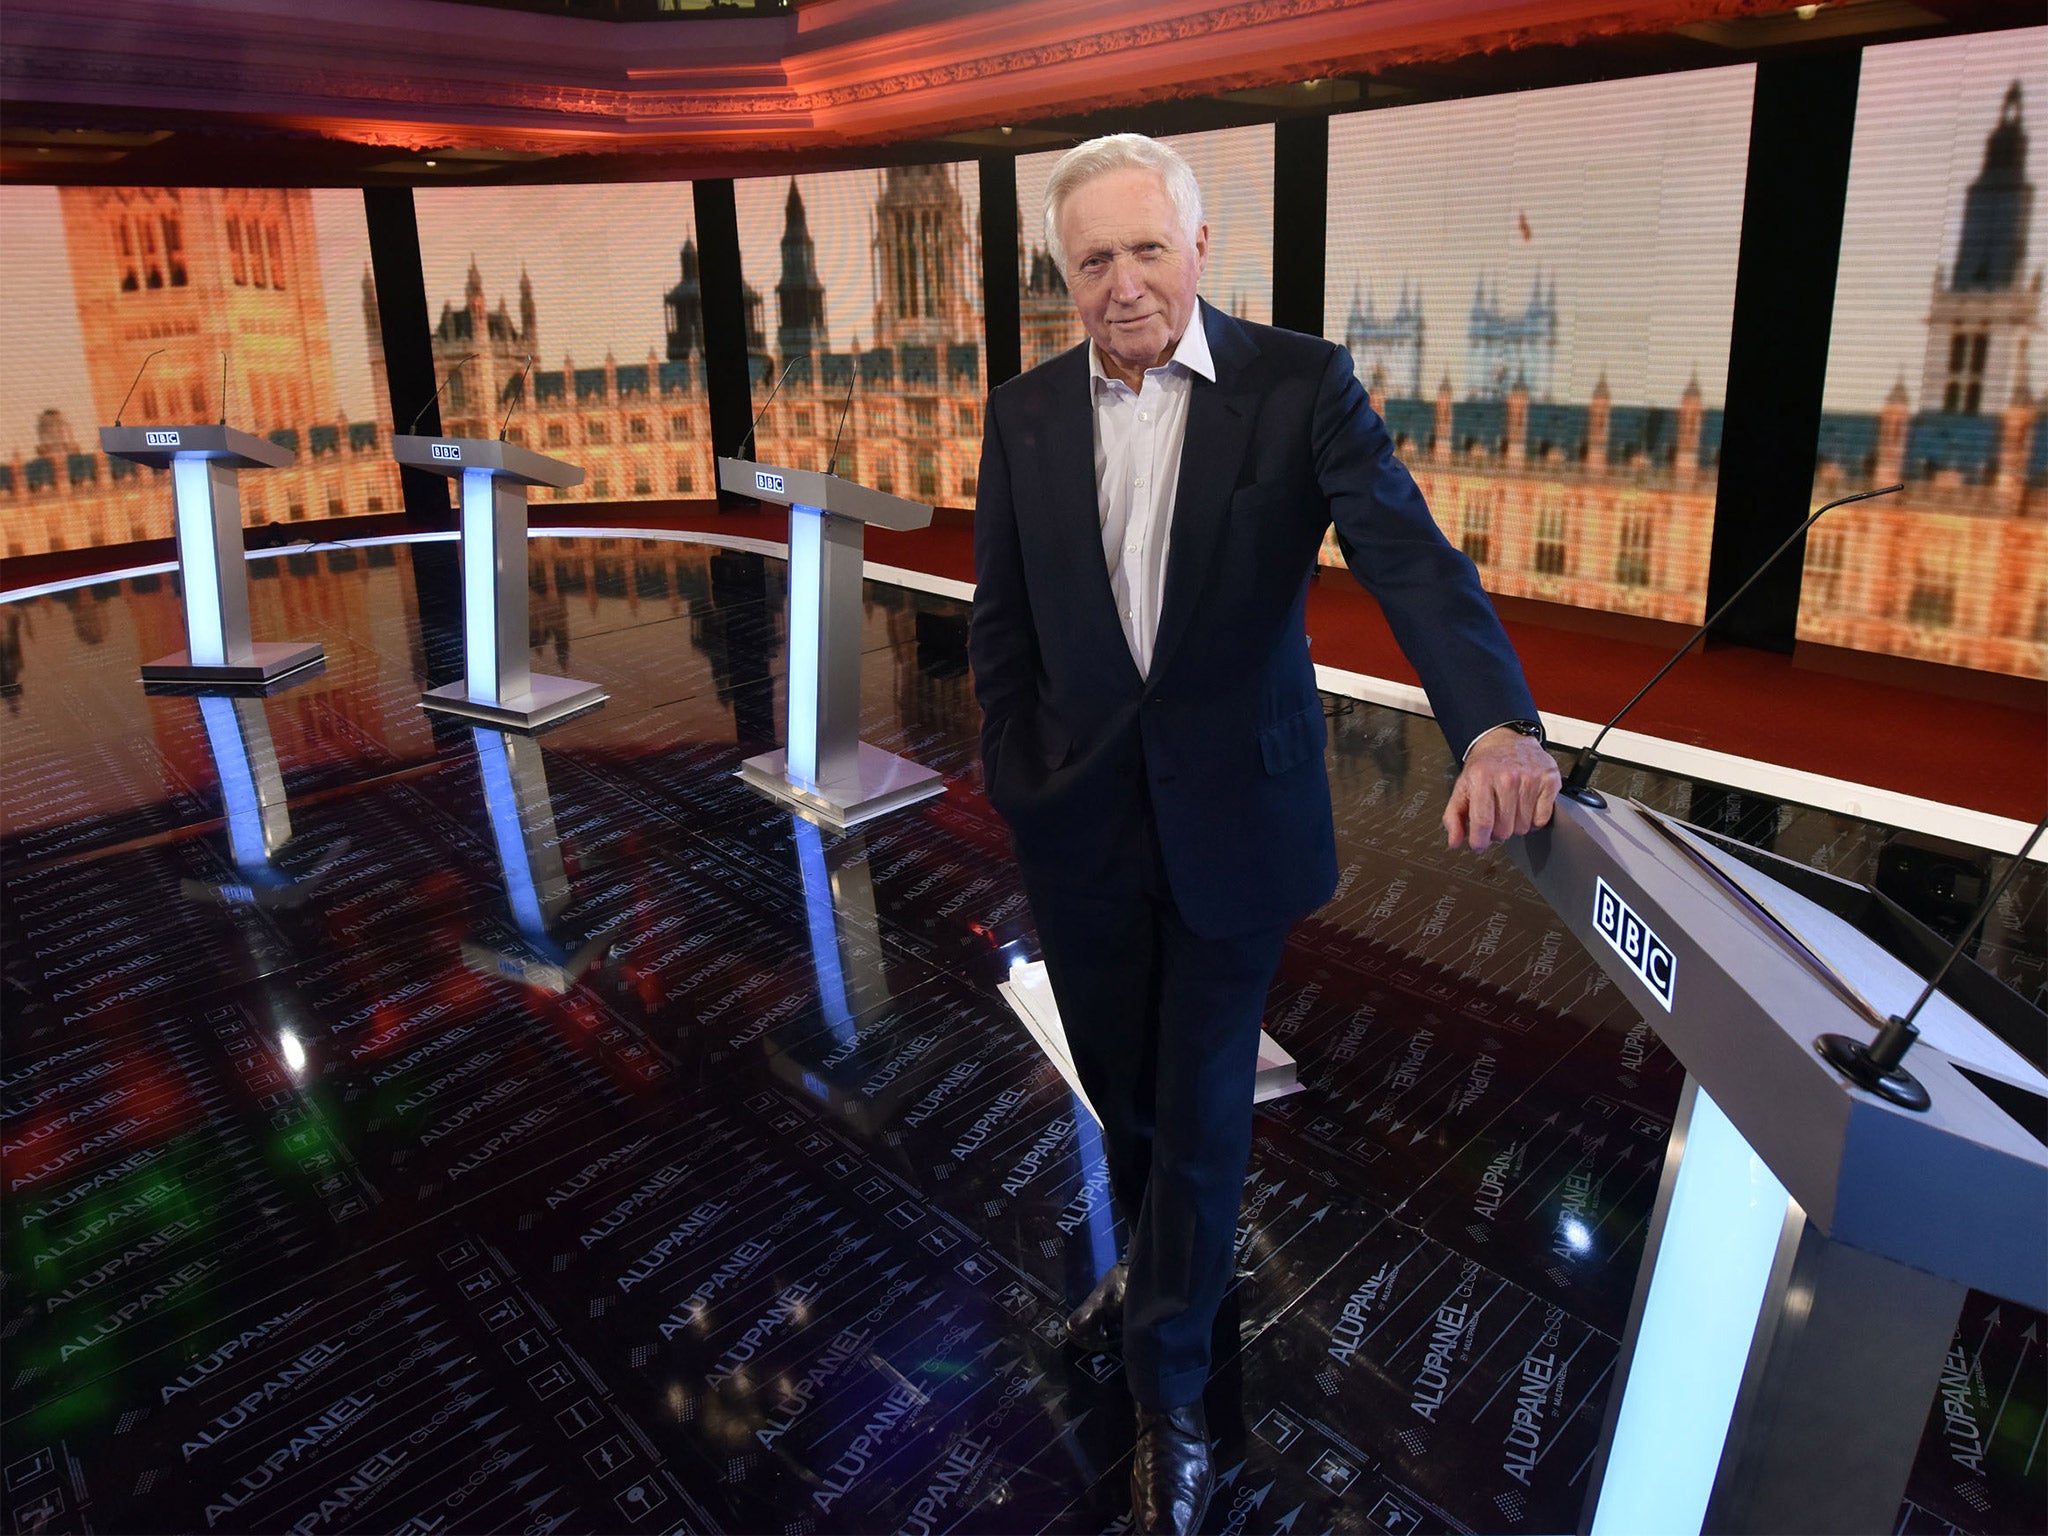 David Dimbleby on the set of the BBC Election Debate 2015